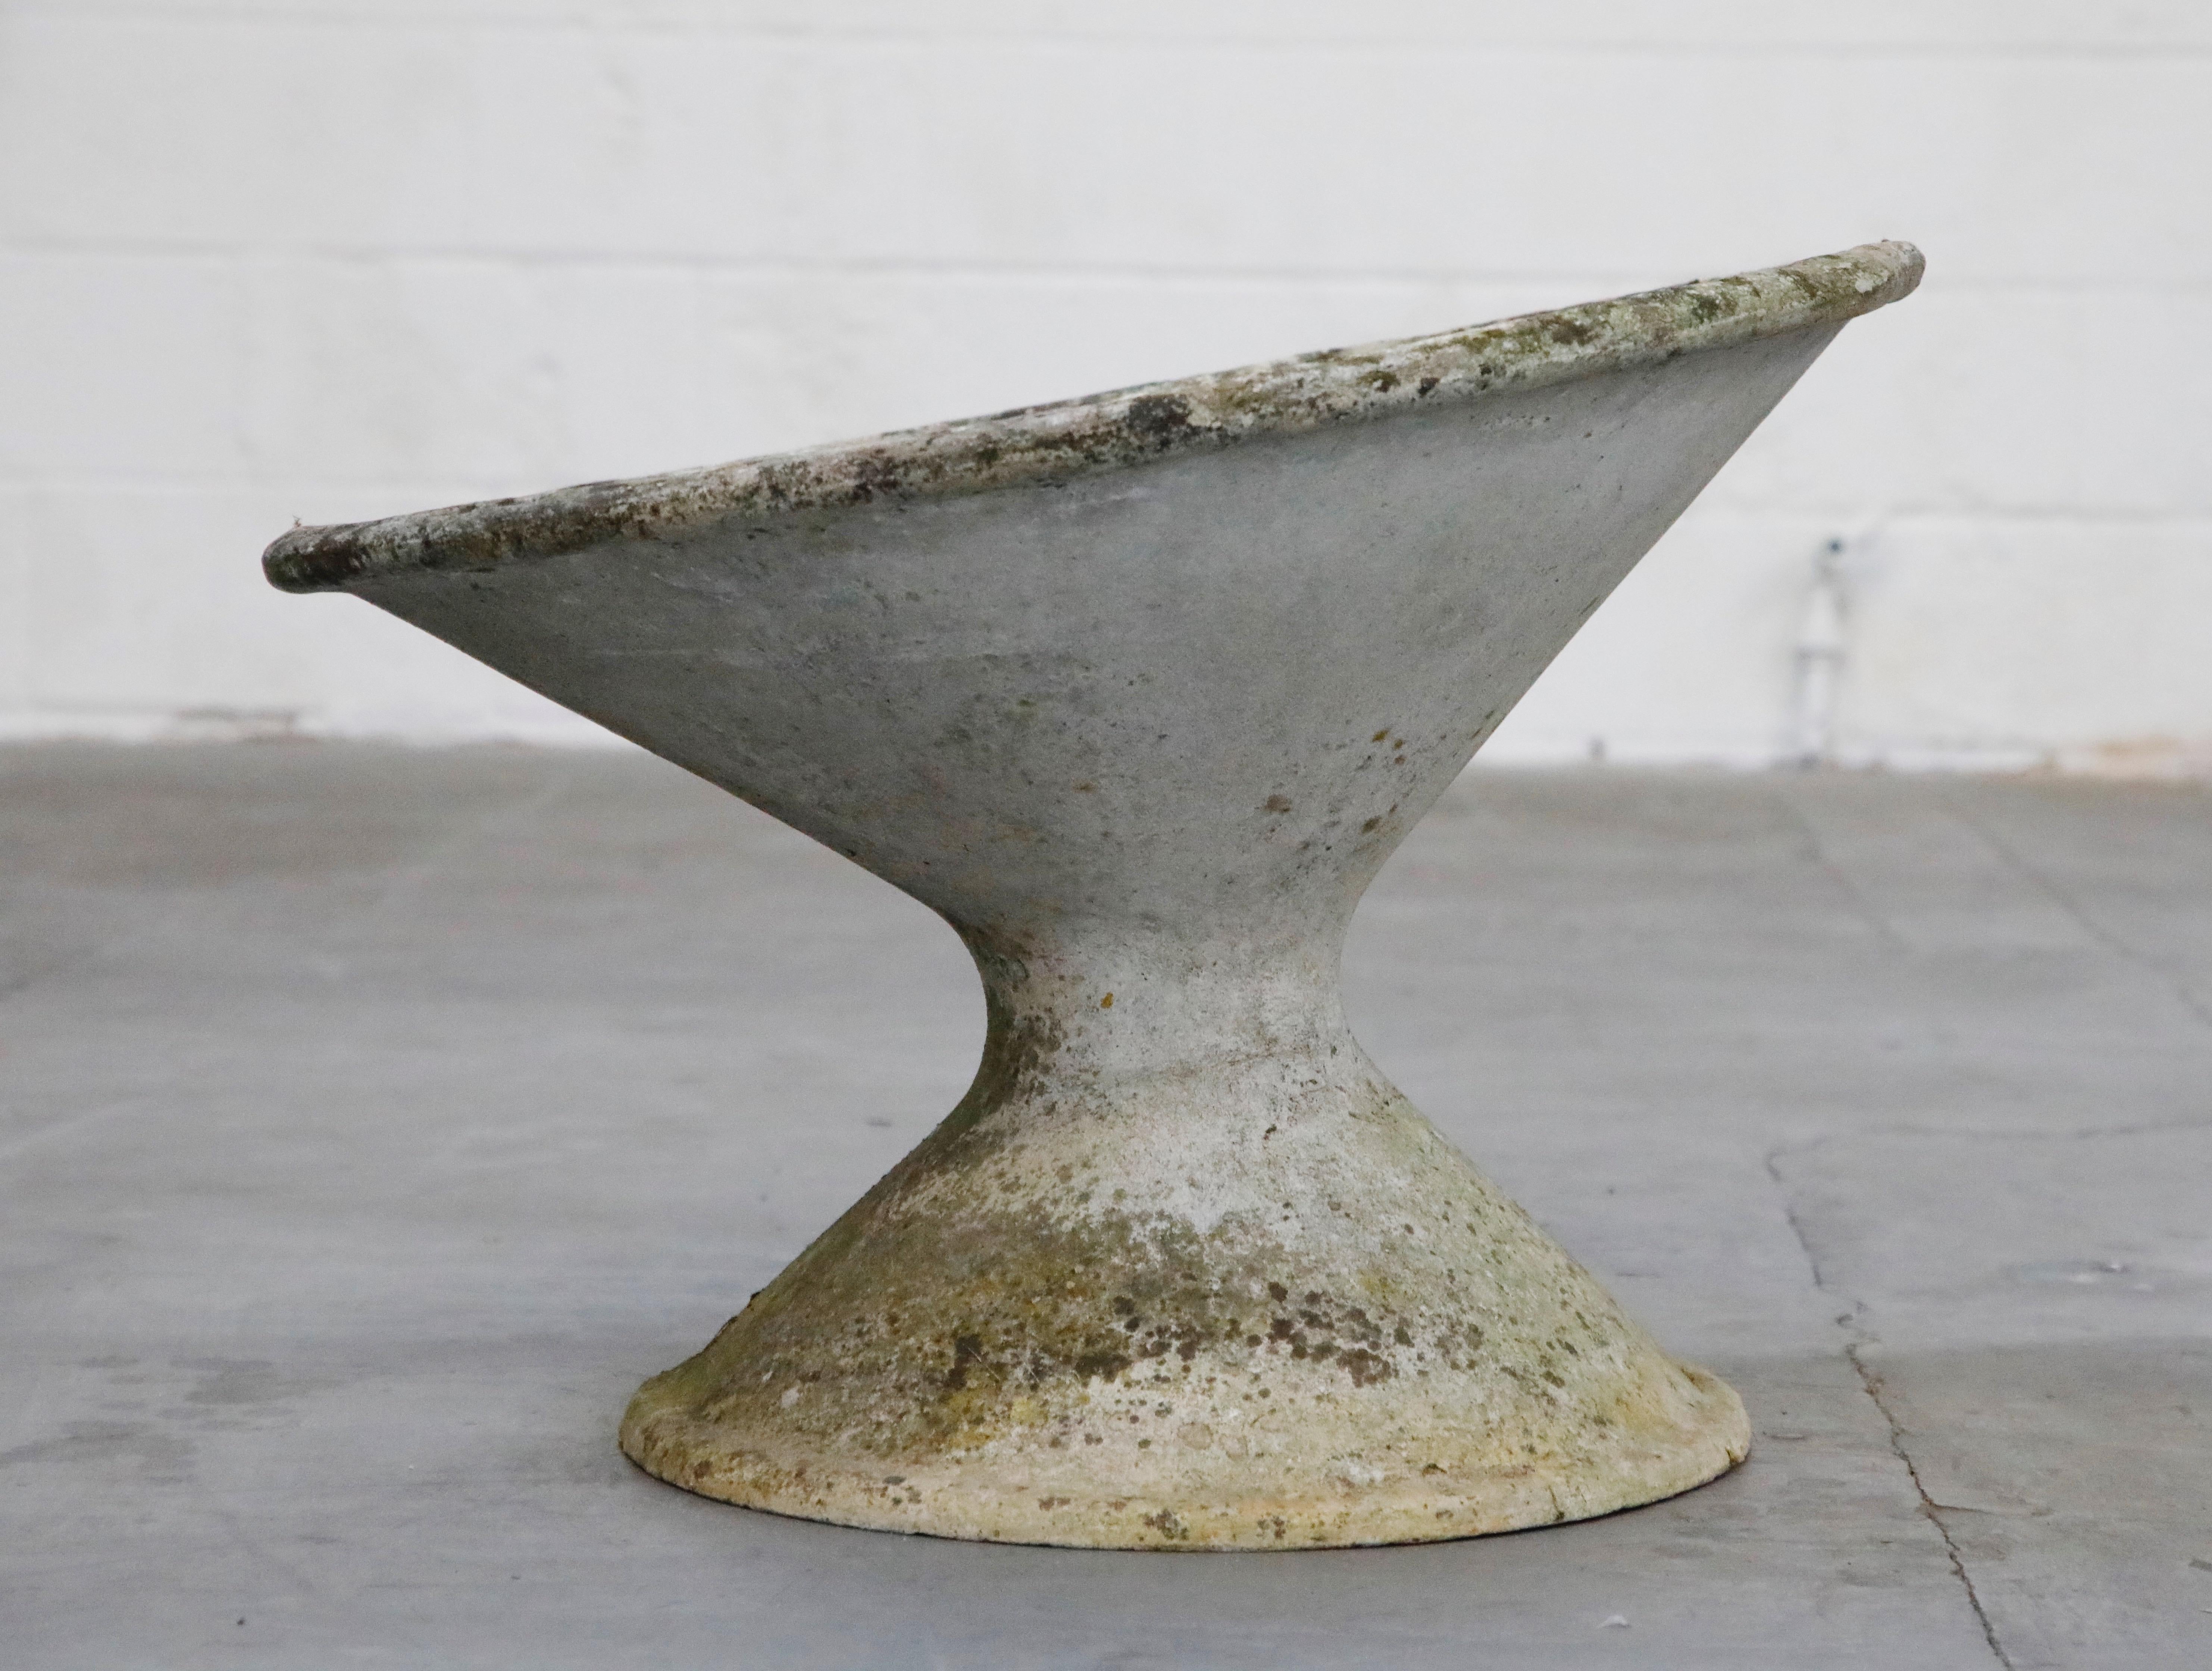 Concrete Willy Guhl for Eternit Large Sized Tilted Spindle Planter, circa 1968, Signed